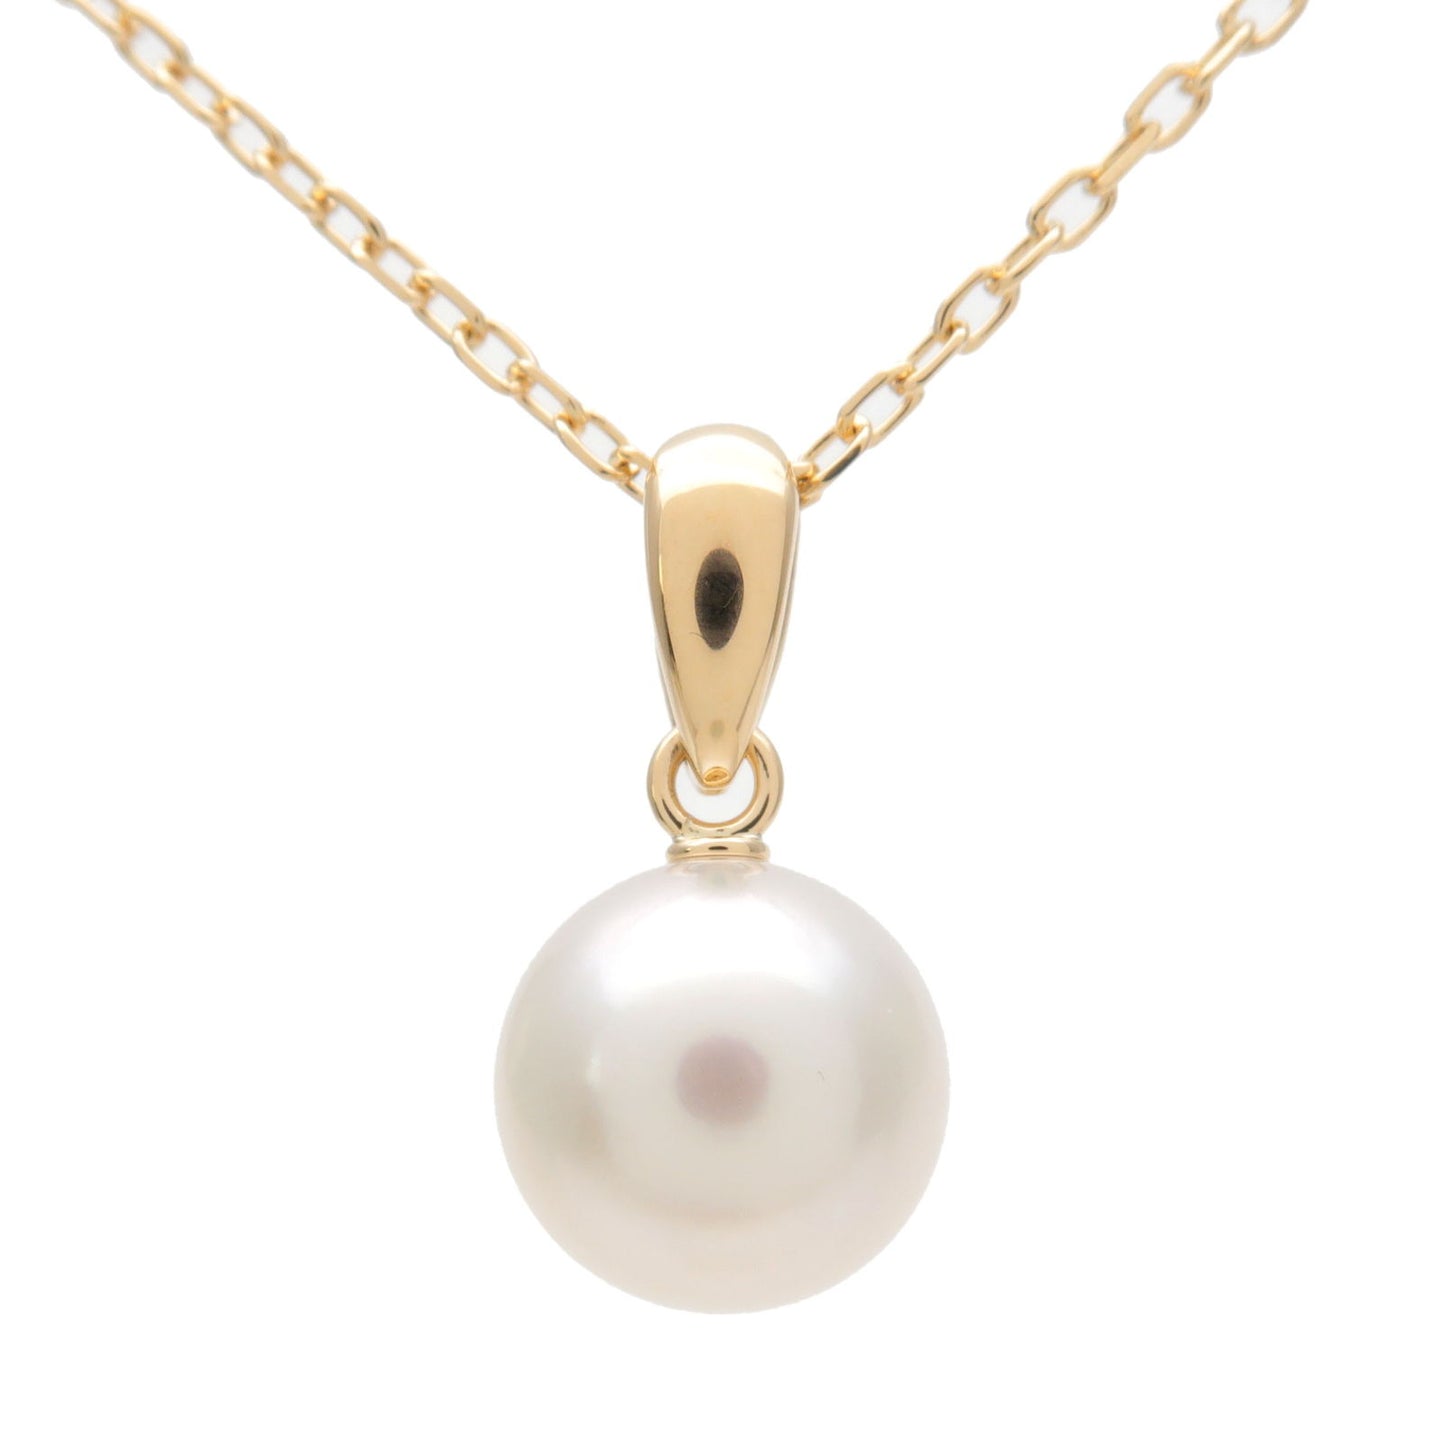 MIKIMOTO-Pearl-Necklace-Pendant-8.0mm-K18YG-750YG-Yellow-Gold